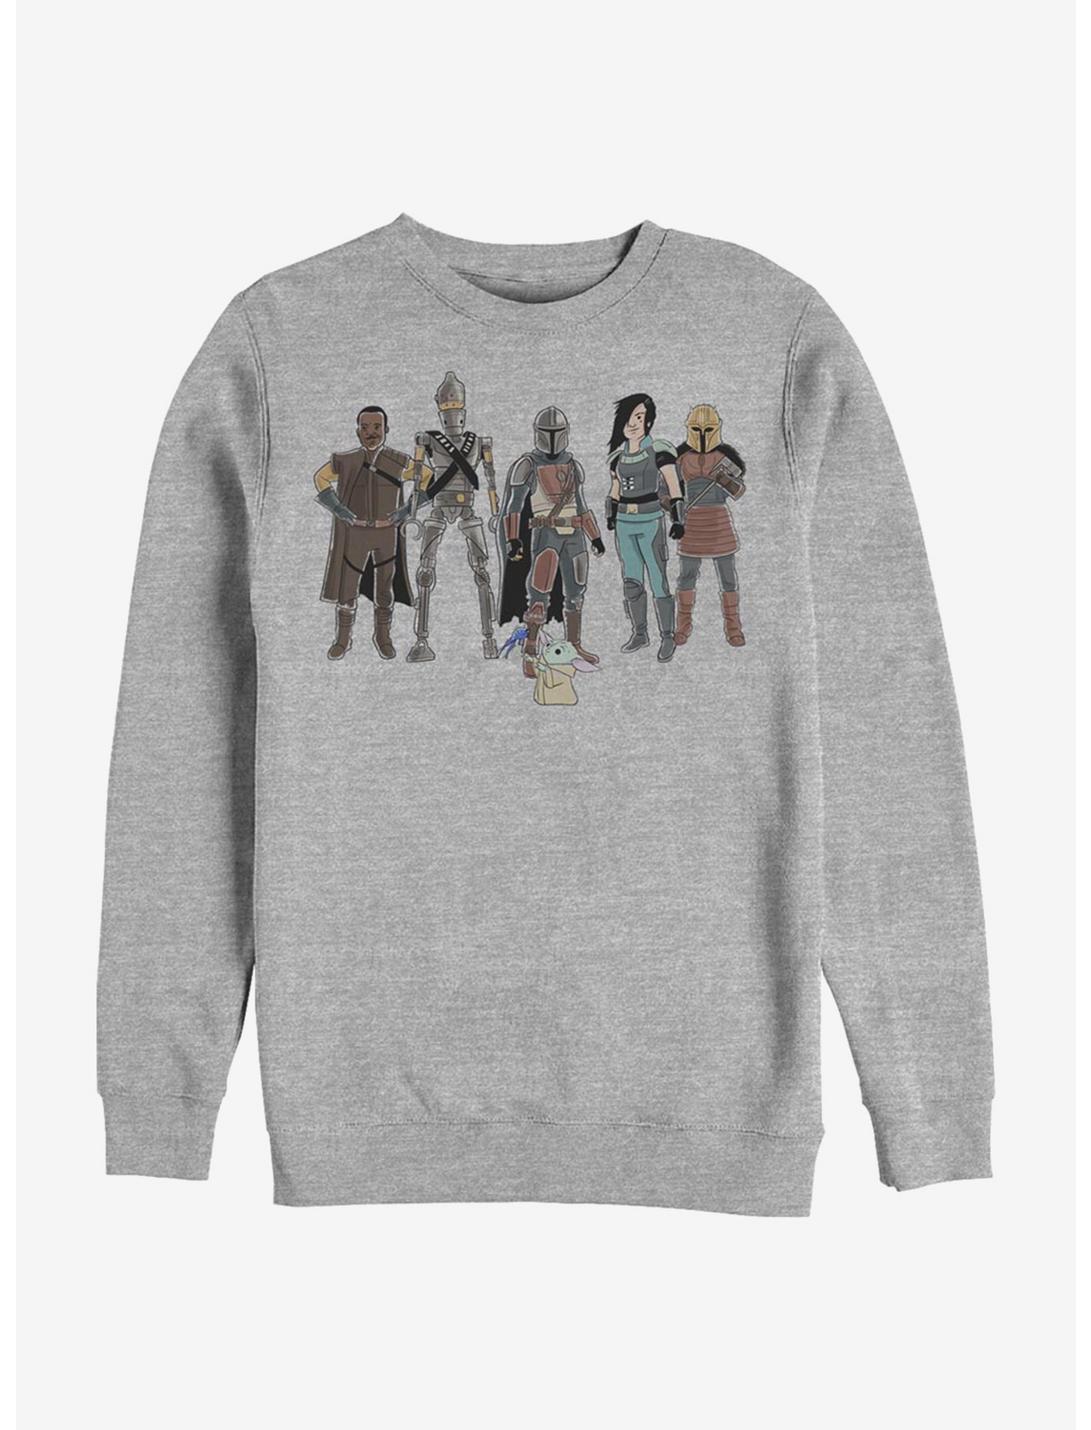 Star Wars The Mandalorian The Child And Friends Sweatshirt, ATH HTR, hi-res